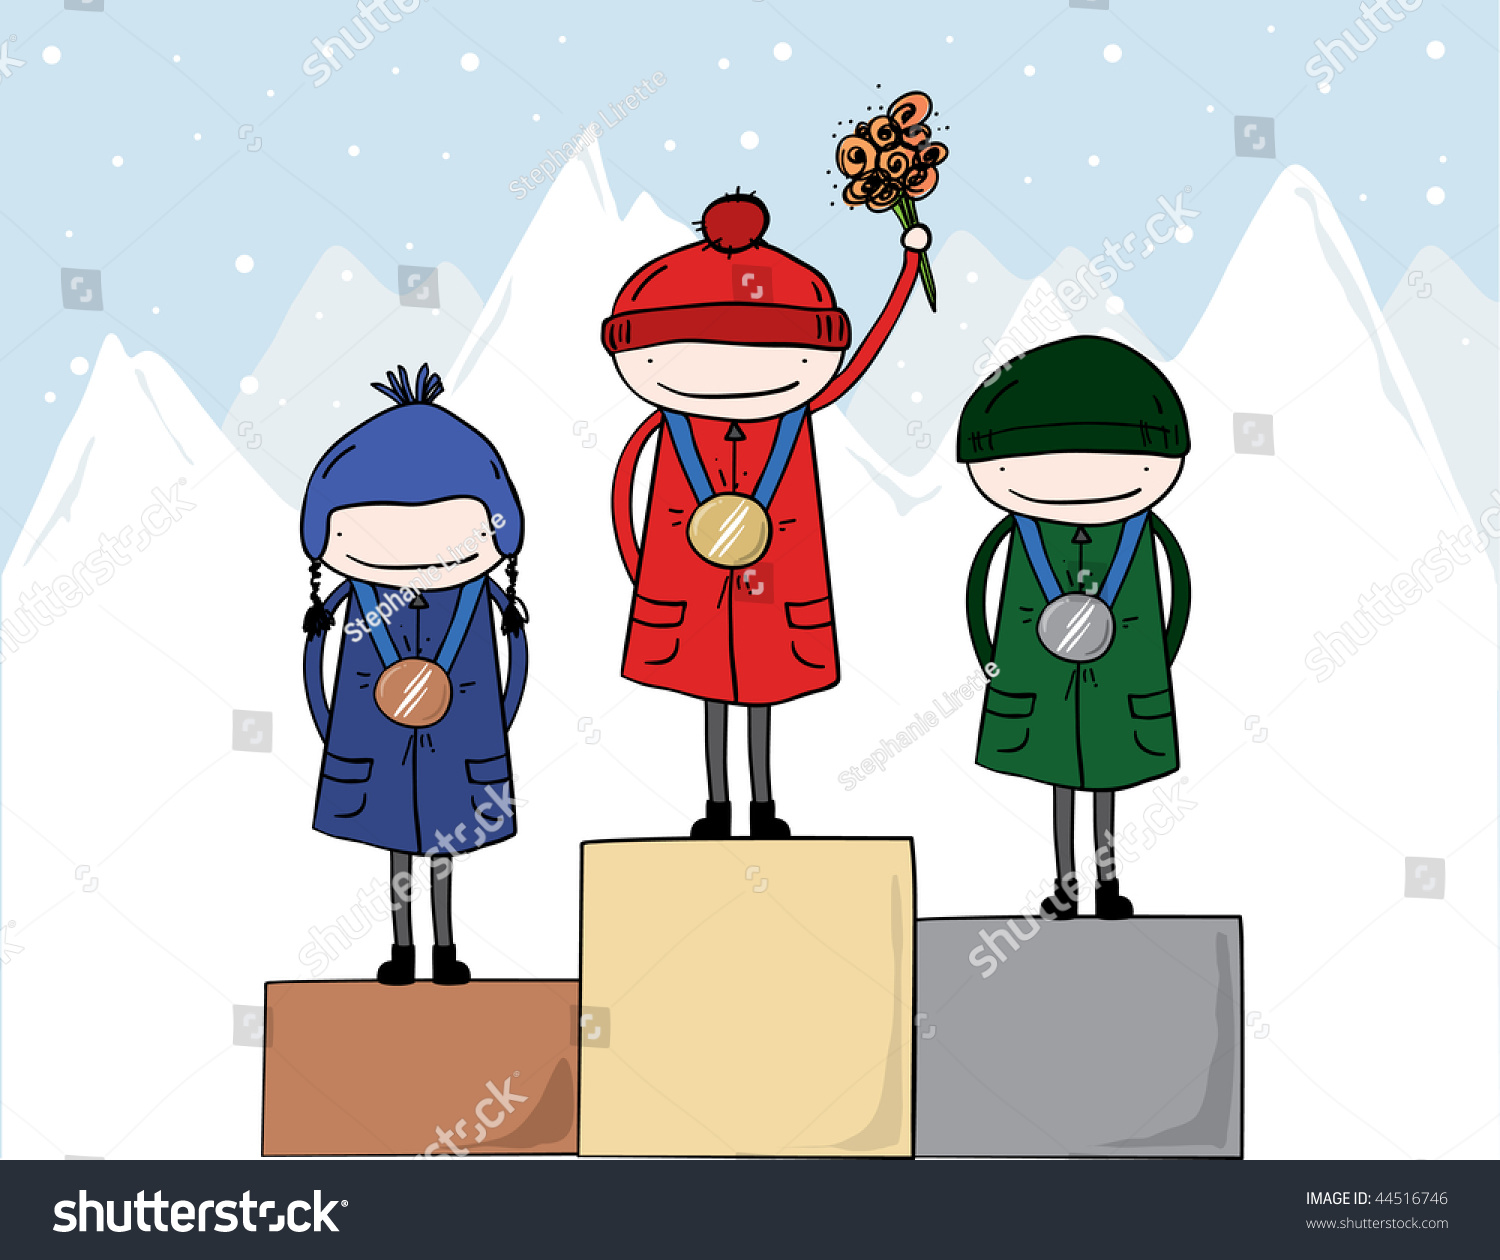 clipart of winter olympic events - photo #26